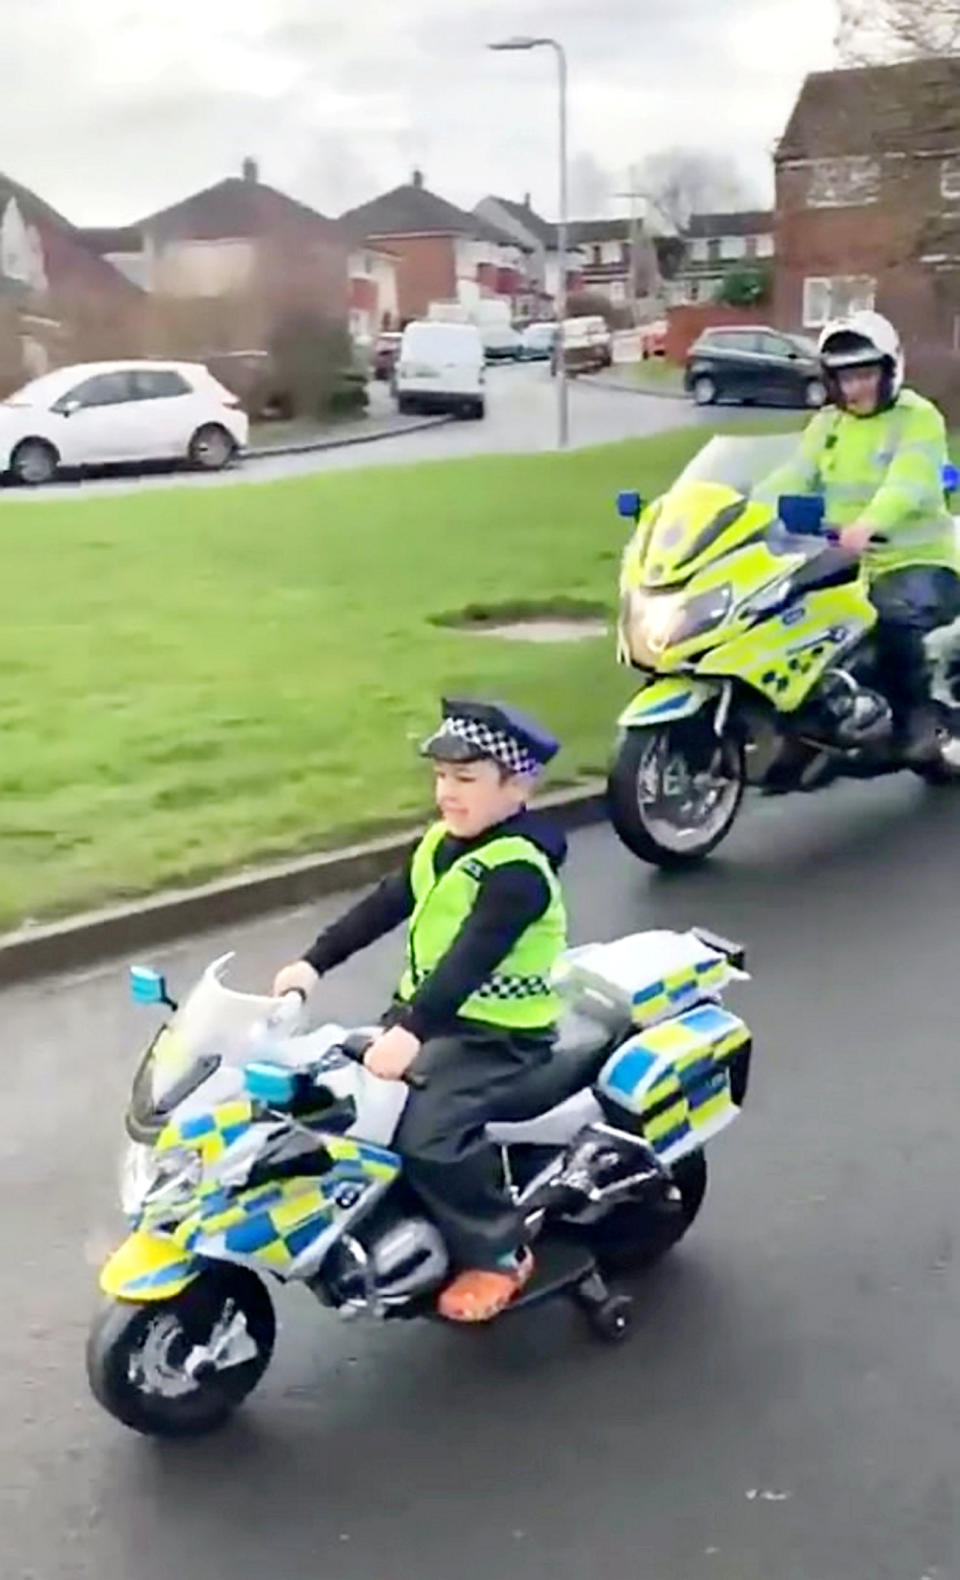 A five-year-old boy grieving his dad had his dream fulfilled when he became an honorary motorbike cop for the day.  See SWNS story SWSMcops.  Harry Farrell was left heartbroken when his former England youth footballer dad Craig died suddenly aged just 39.  Craig, who won three caps for England U-16s, was also a striker for Carlisle United, York City and Whitby Town, died last May.  Little Harry, who dreams of being a cop when he grows up, asked Santa Claus for an electric police motorbike for Christmas.  Last week his dream of being a cop came true when Durham Constabulary&#x92;s Motorcycle Section surprised him at his home.  Video shows Harry &#x96; wearing a police uniform - leading a four-man patrol around the streets of his home in Durham.  The surprise was arranged by Harry&#x92;s mum Emma Overton. 